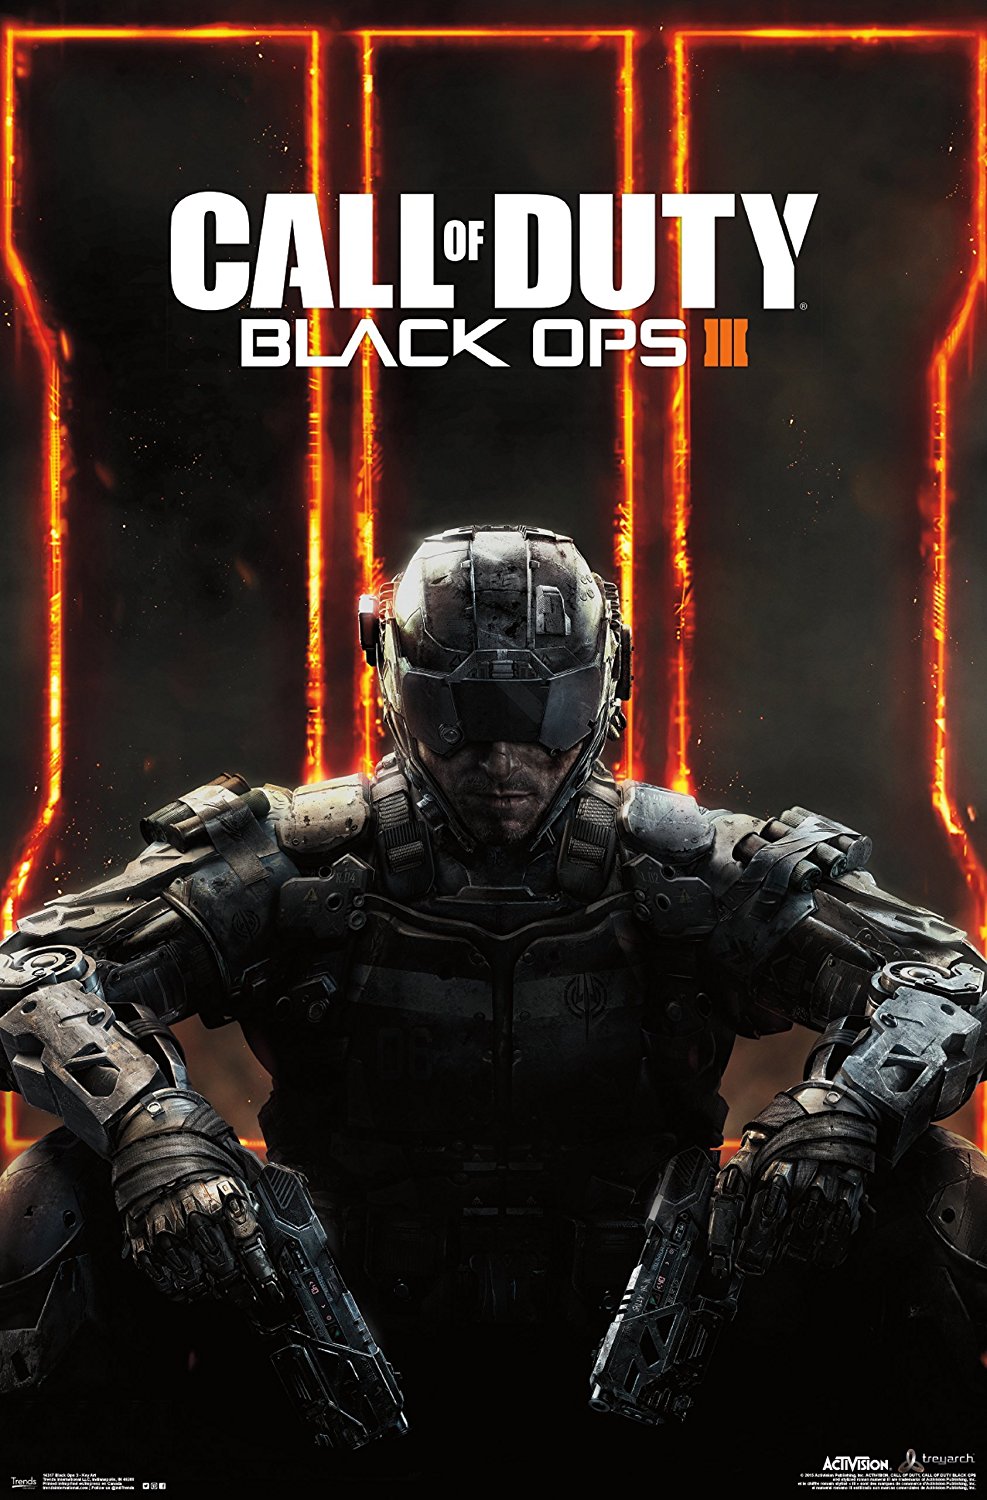 call of duty pc games download